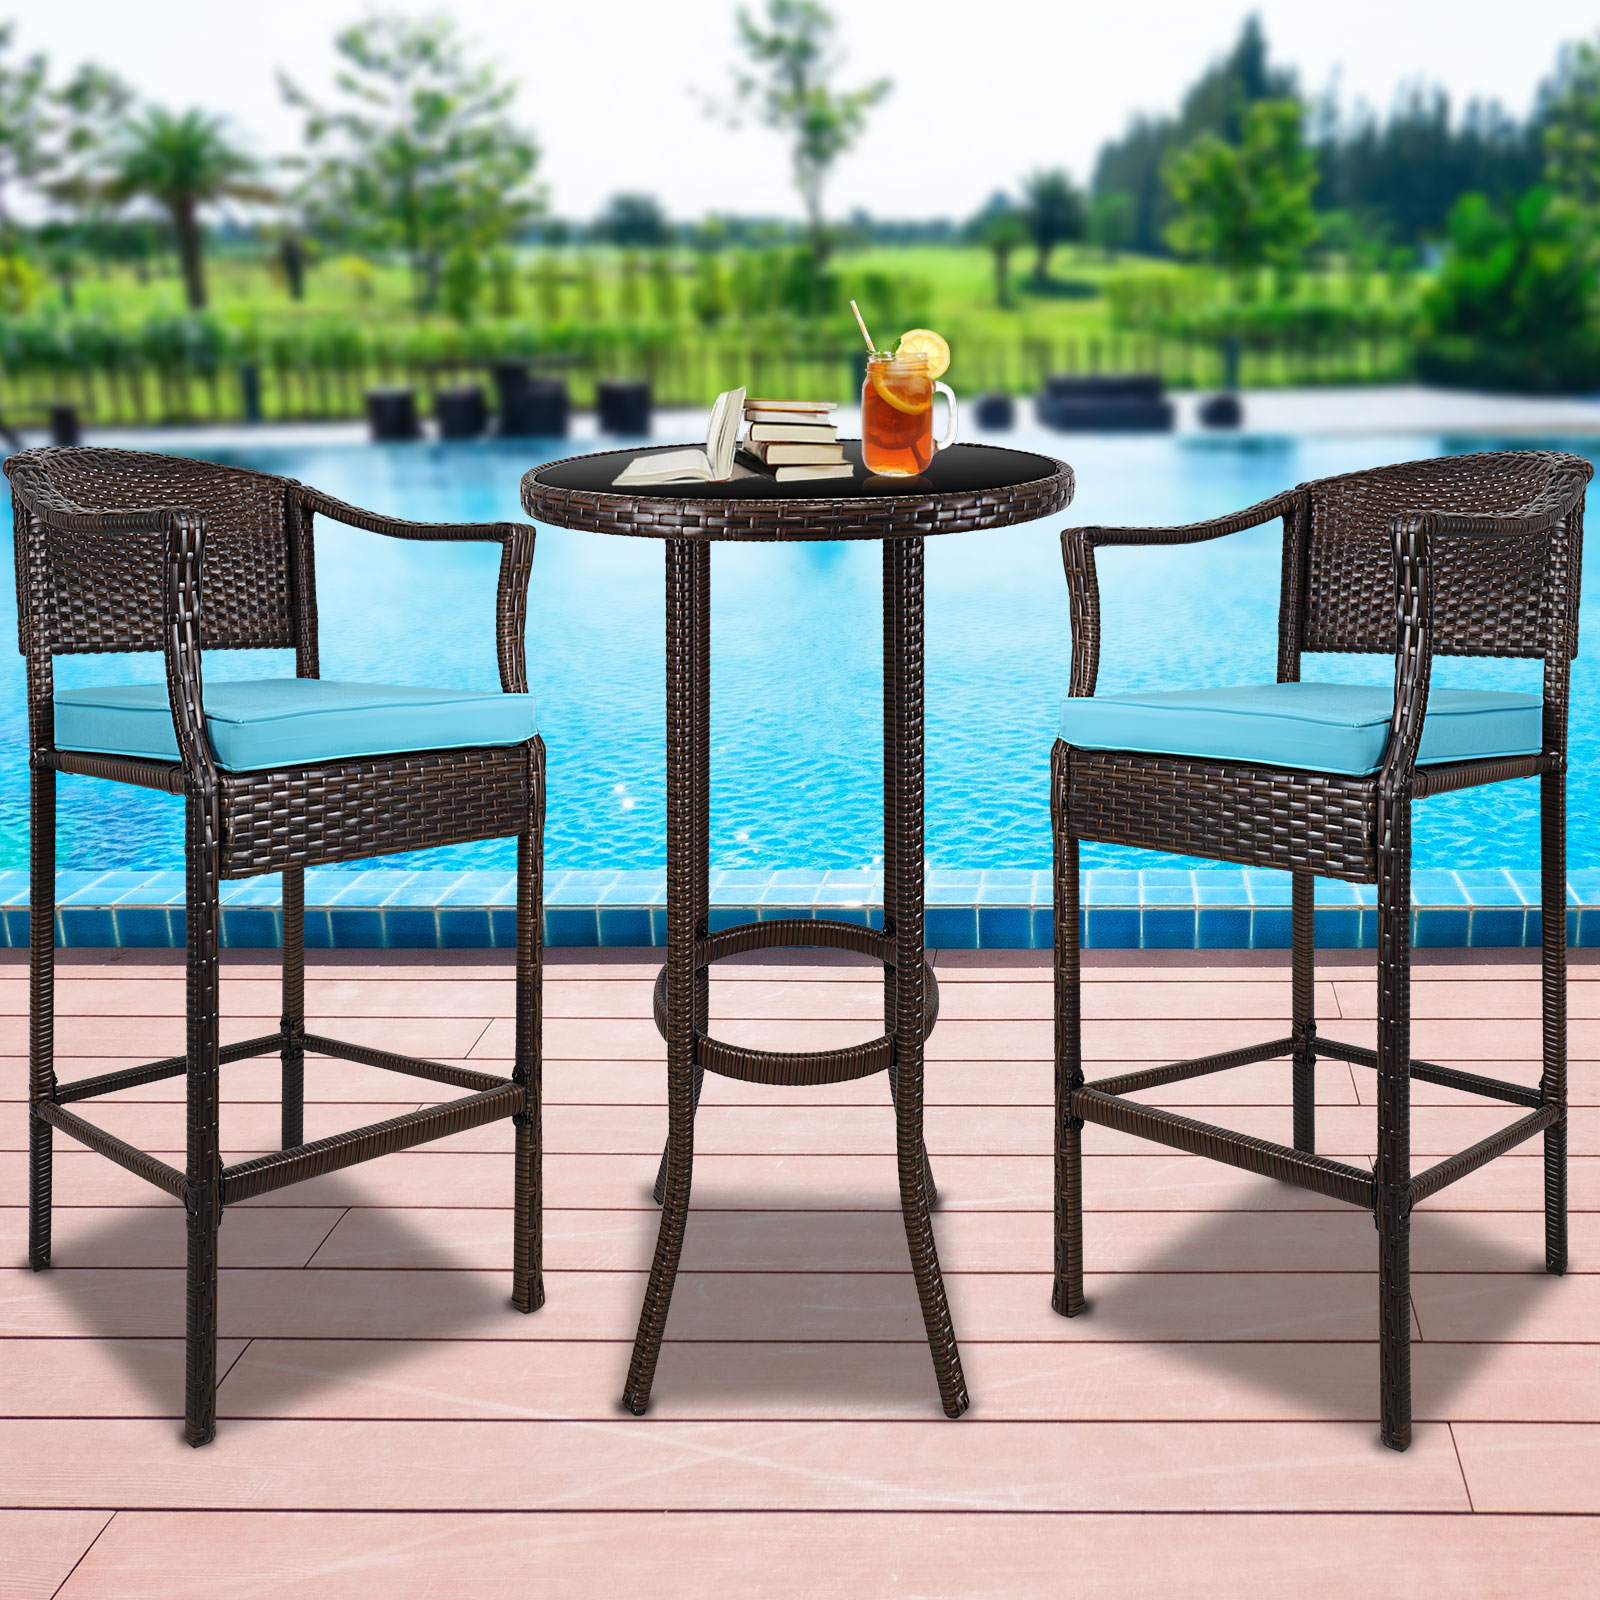 Outdoor High Top Table and Chair, Patio Furniture High Top Table Set with Glass Coffee Table, Removable Cushions, Outdoor Bar Table with Chair, Patio Bistro Set for Backyard Poolside Balcony, Q17056 - image 4 of 13